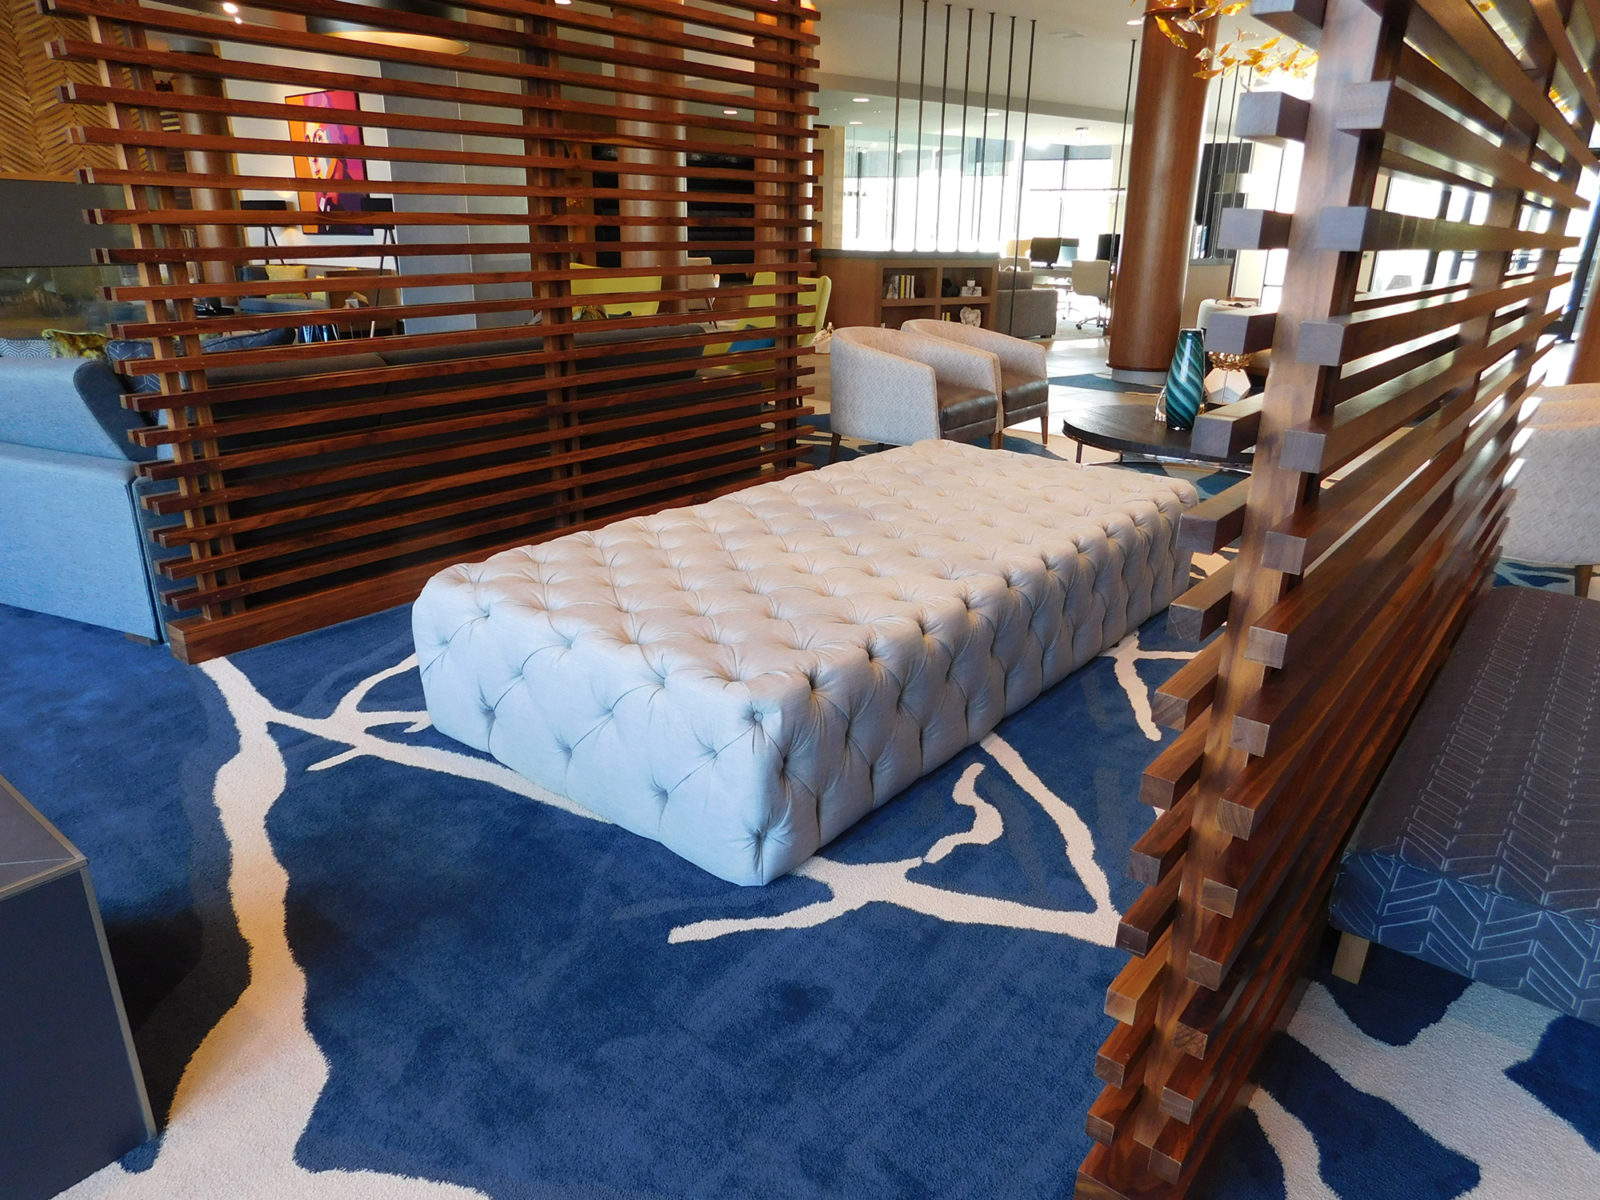 Image of a light color upholstered bench in the center of the lobby. The bench is tufted all over to create depth and dimension to the fabric